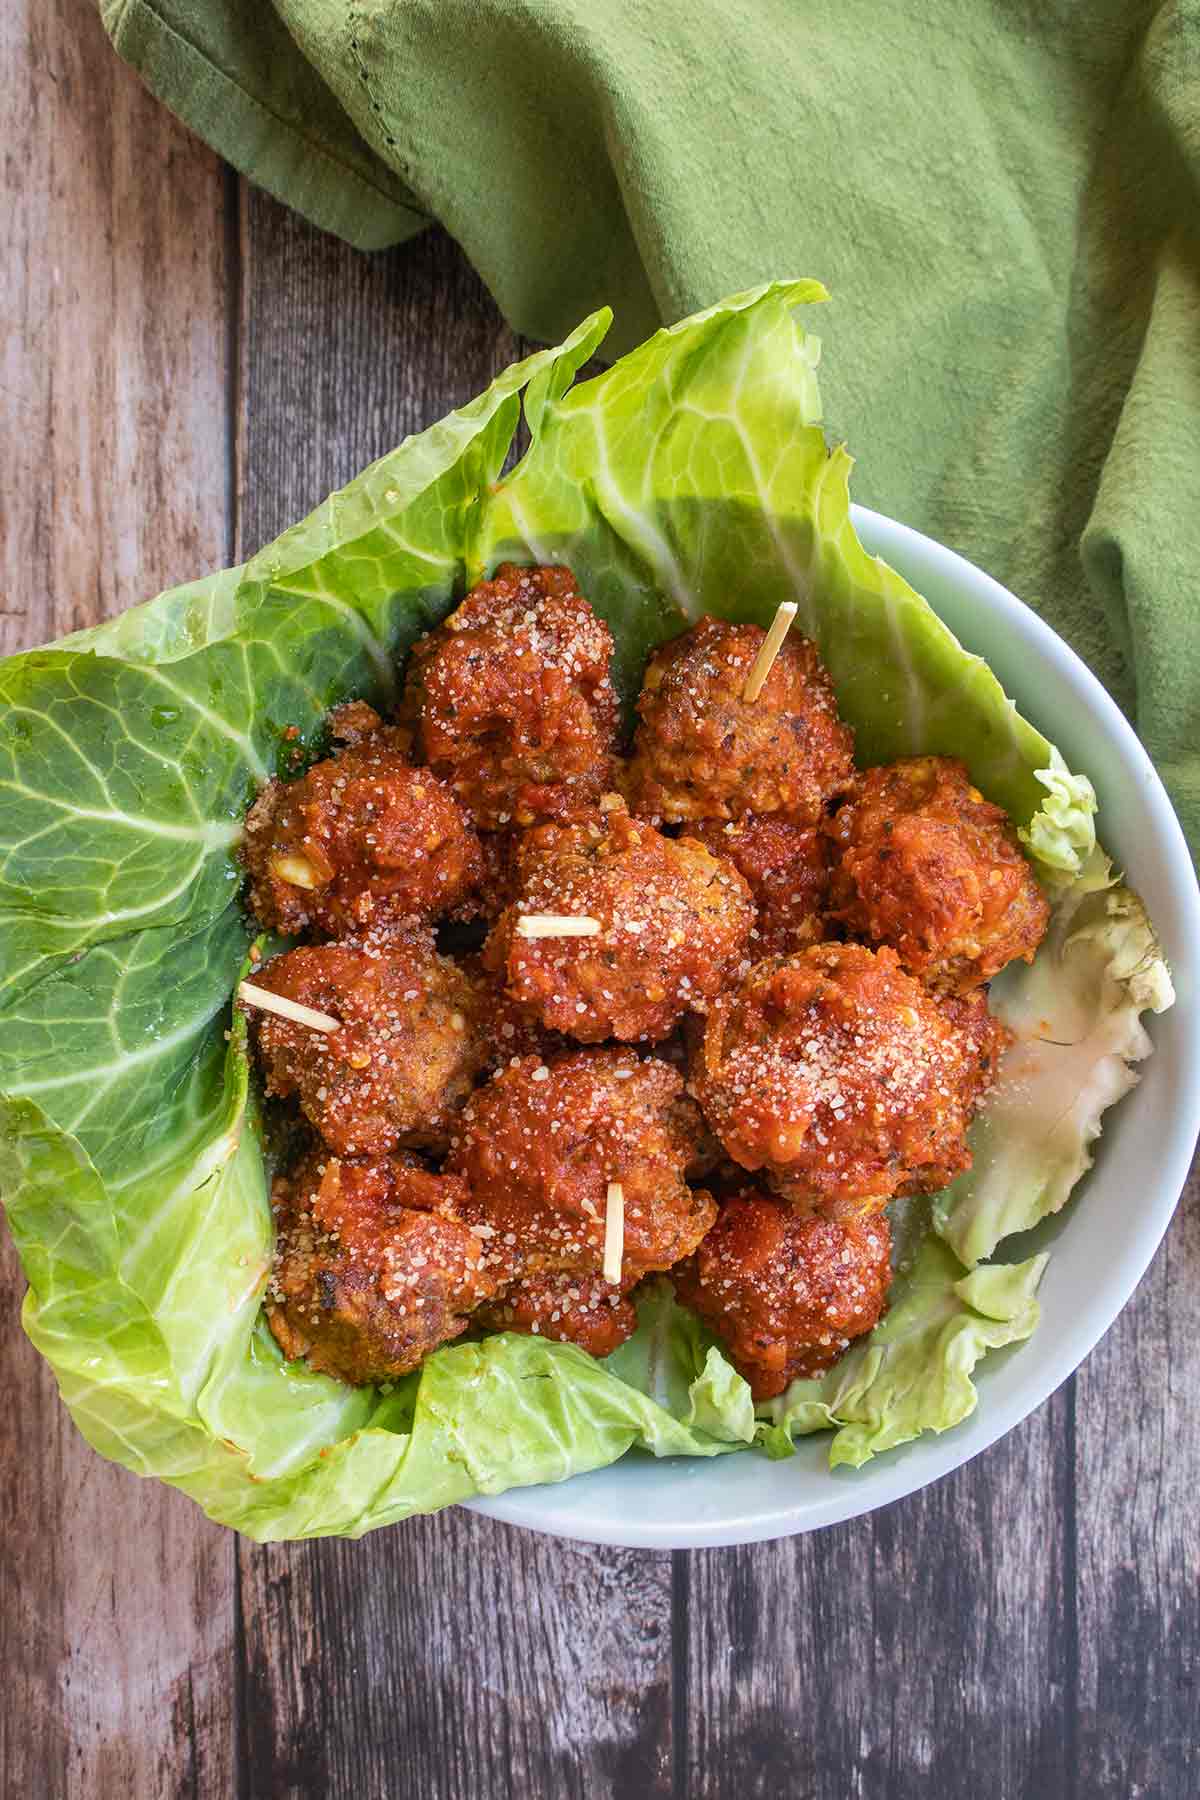 overview of gluten free baked meatballs in a cabbage leaf